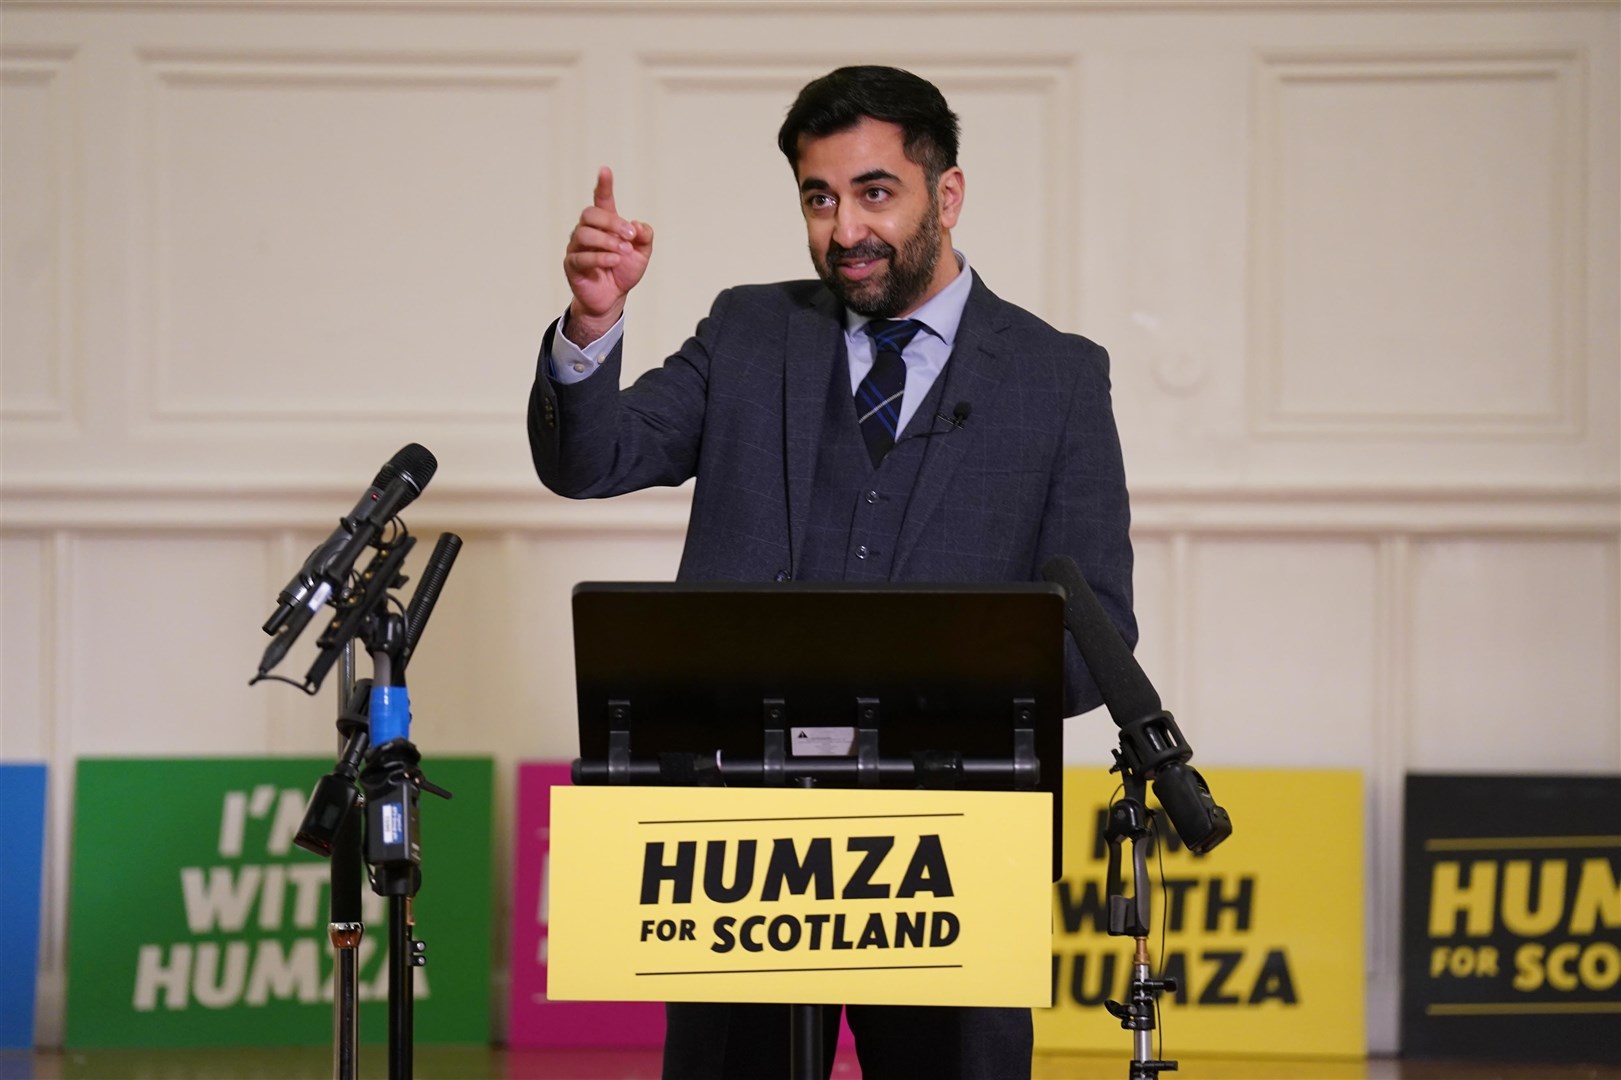 Humza Yousaf has vowed to challenge the UK Government over its decision to block laws reforming the gender recognition process in Scotland (Andrew Milligan/PA)